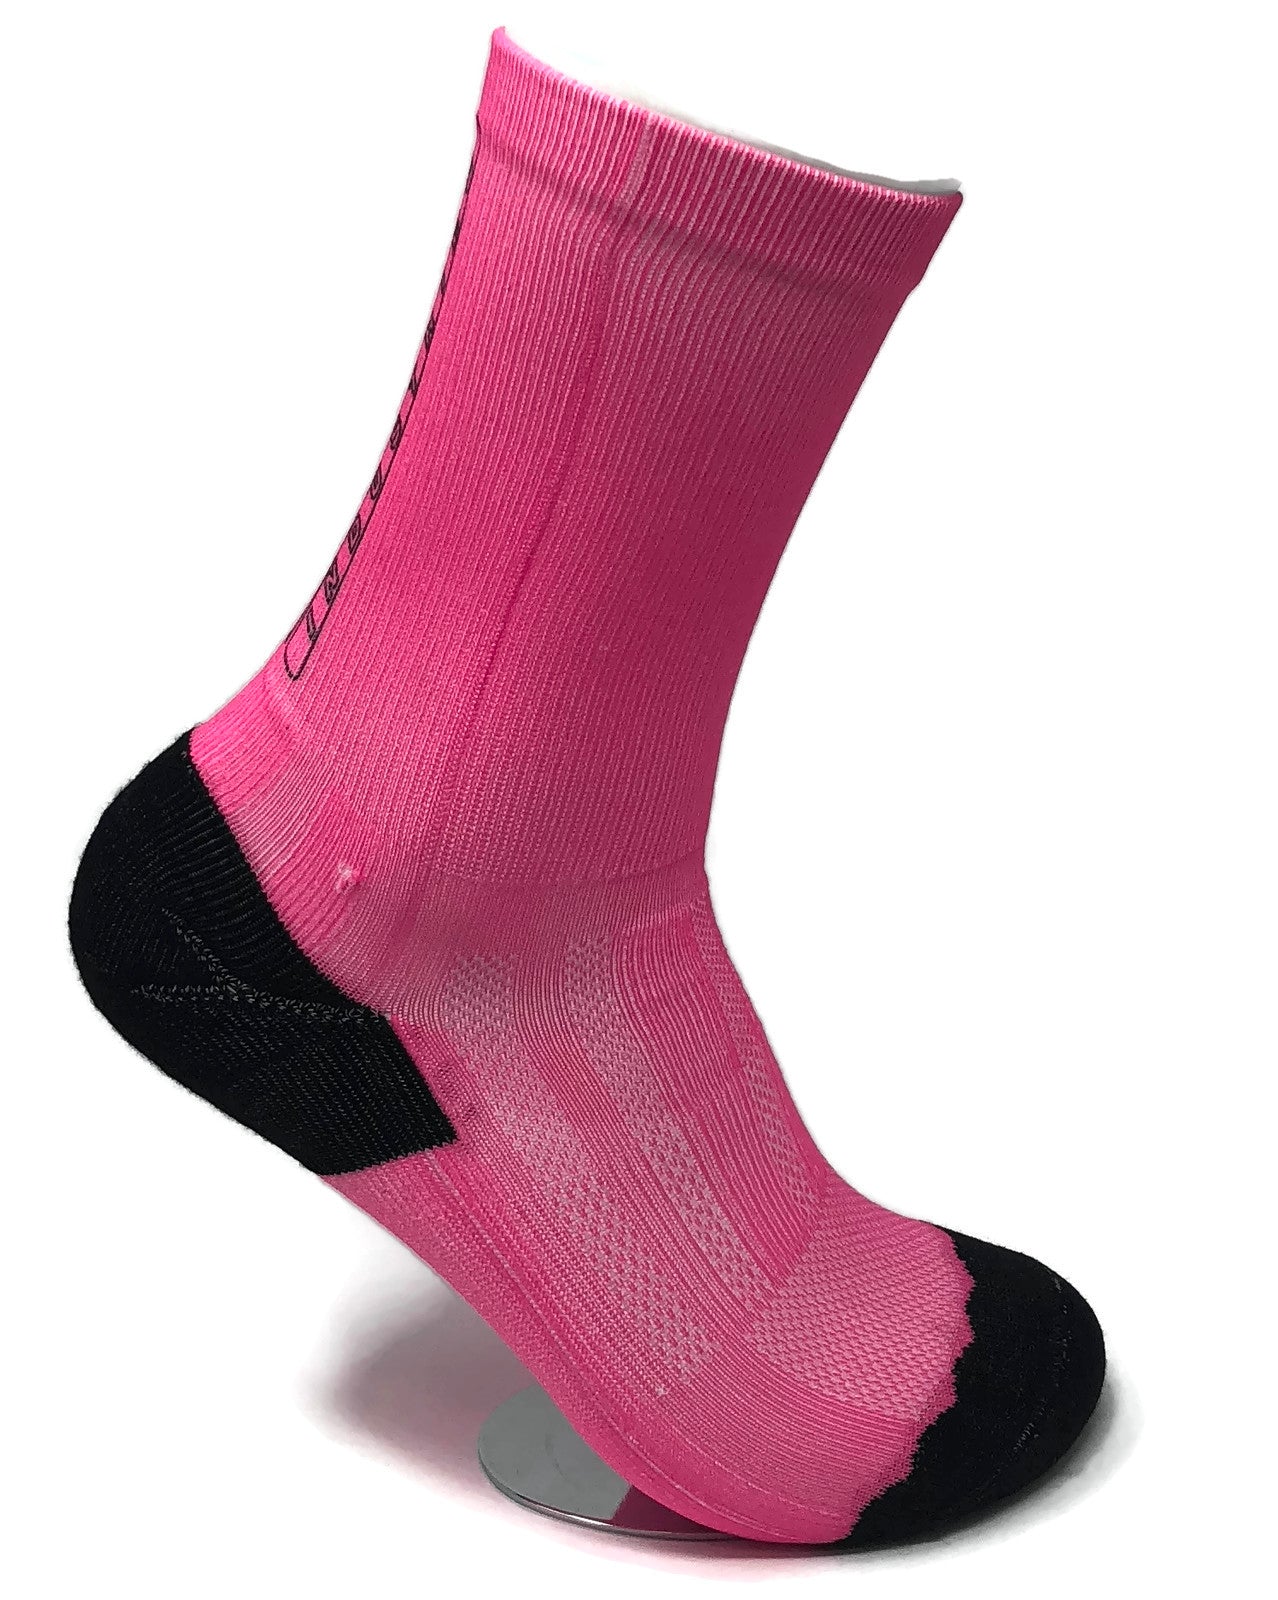 Hi-Viz Sublimated Sock - comes in 4 colors - ISD